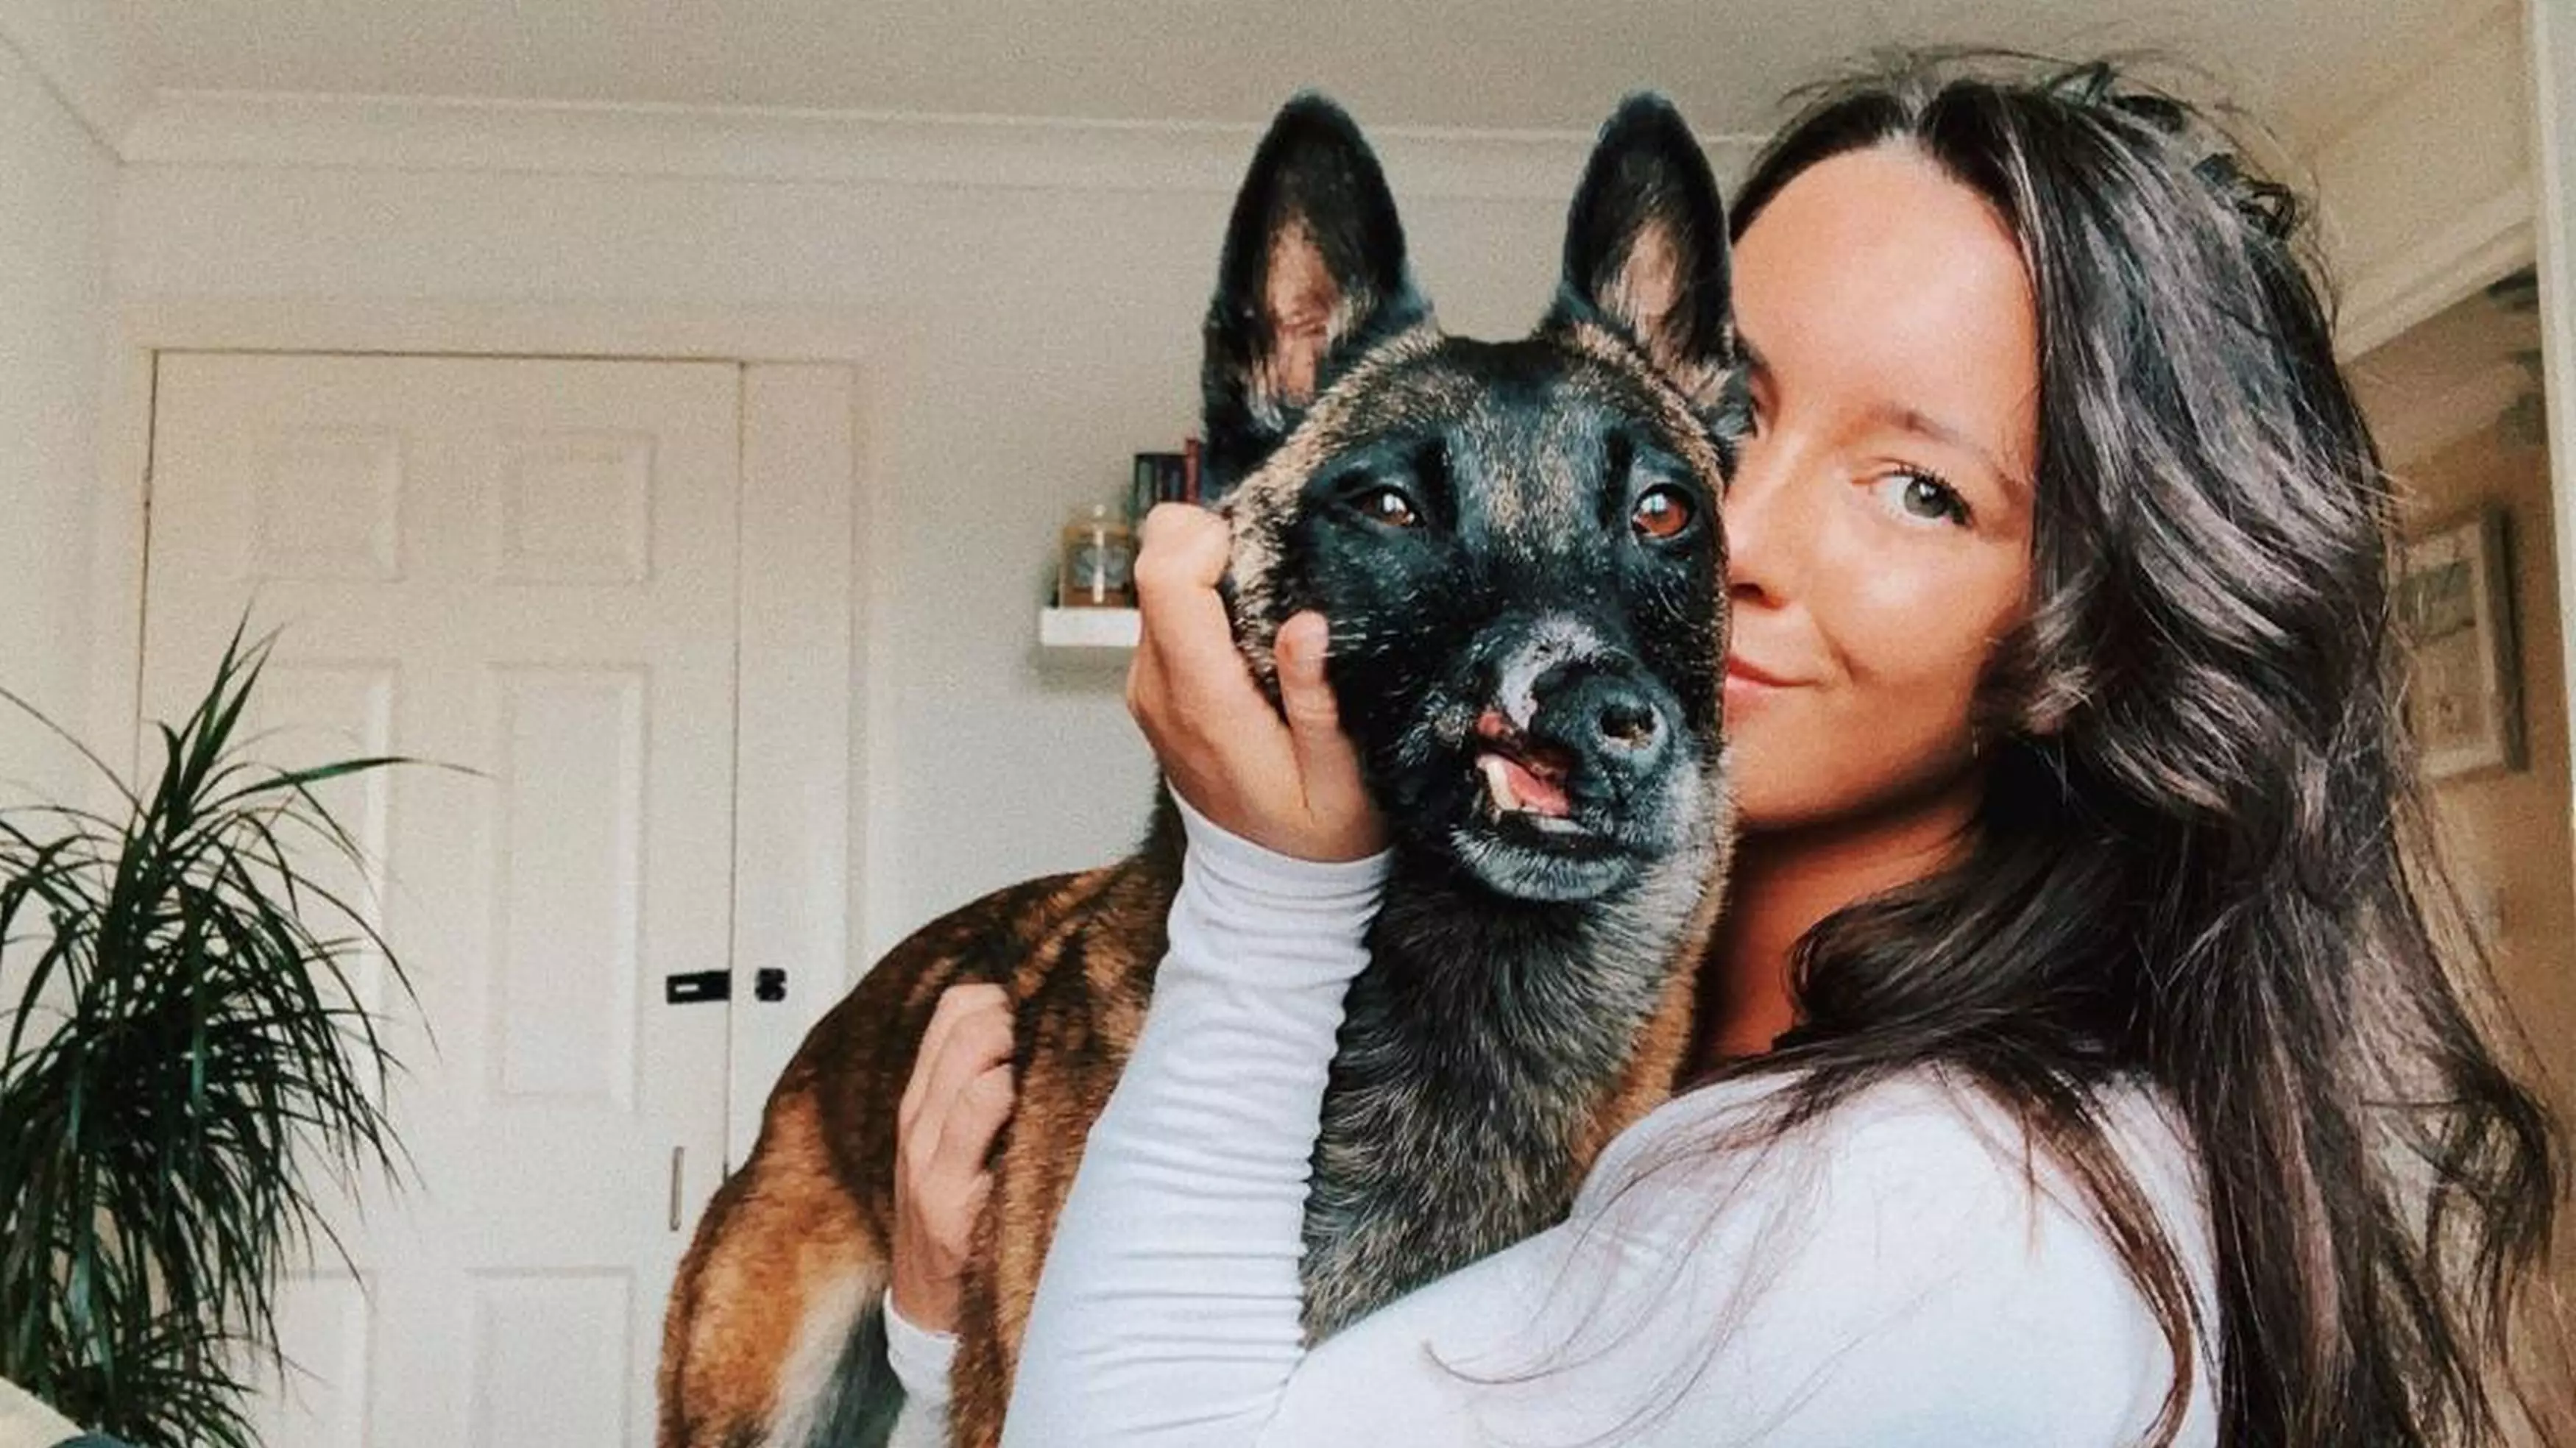 Dog With Damaged Nose Set For Life-Changing Surgery After Instagram Fans Raise £4,500